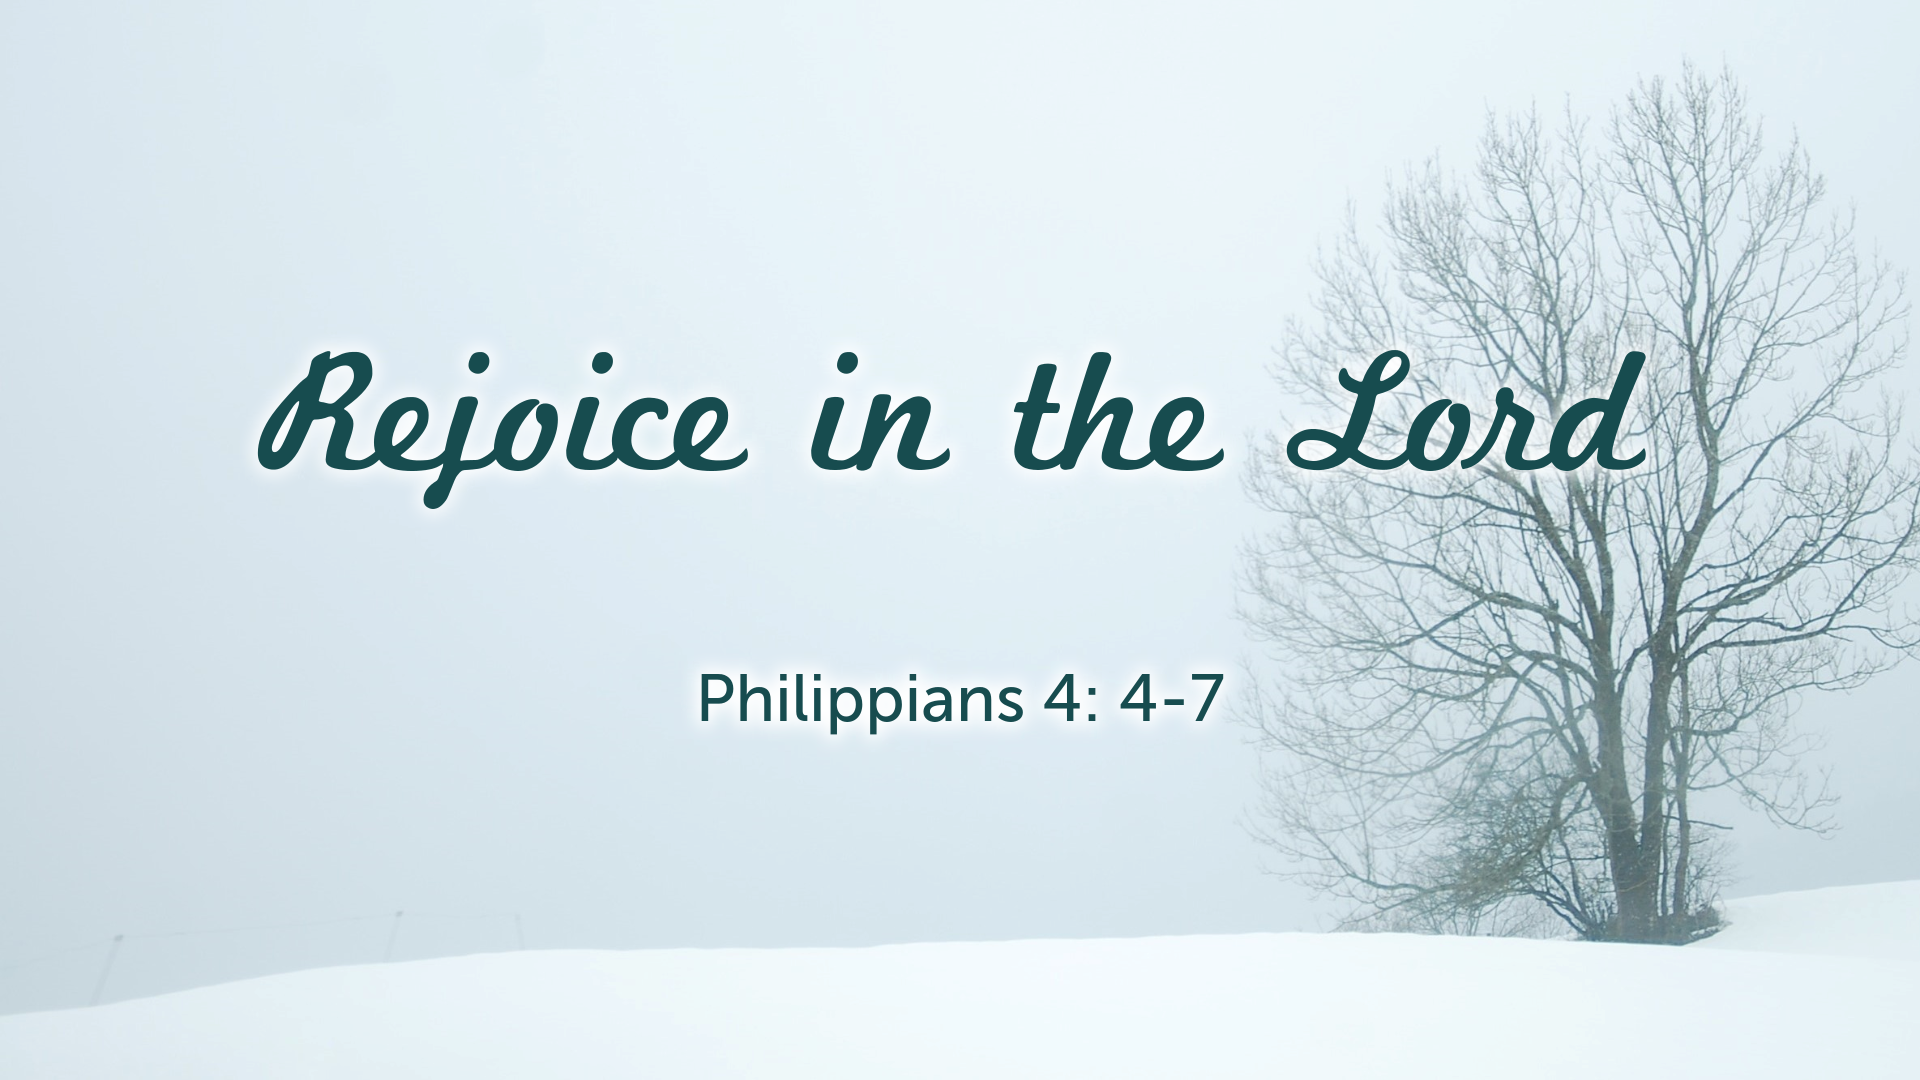 Feb 06, 2022 - Rejoice in the Lord (Video) - Philippians 4: 4-7